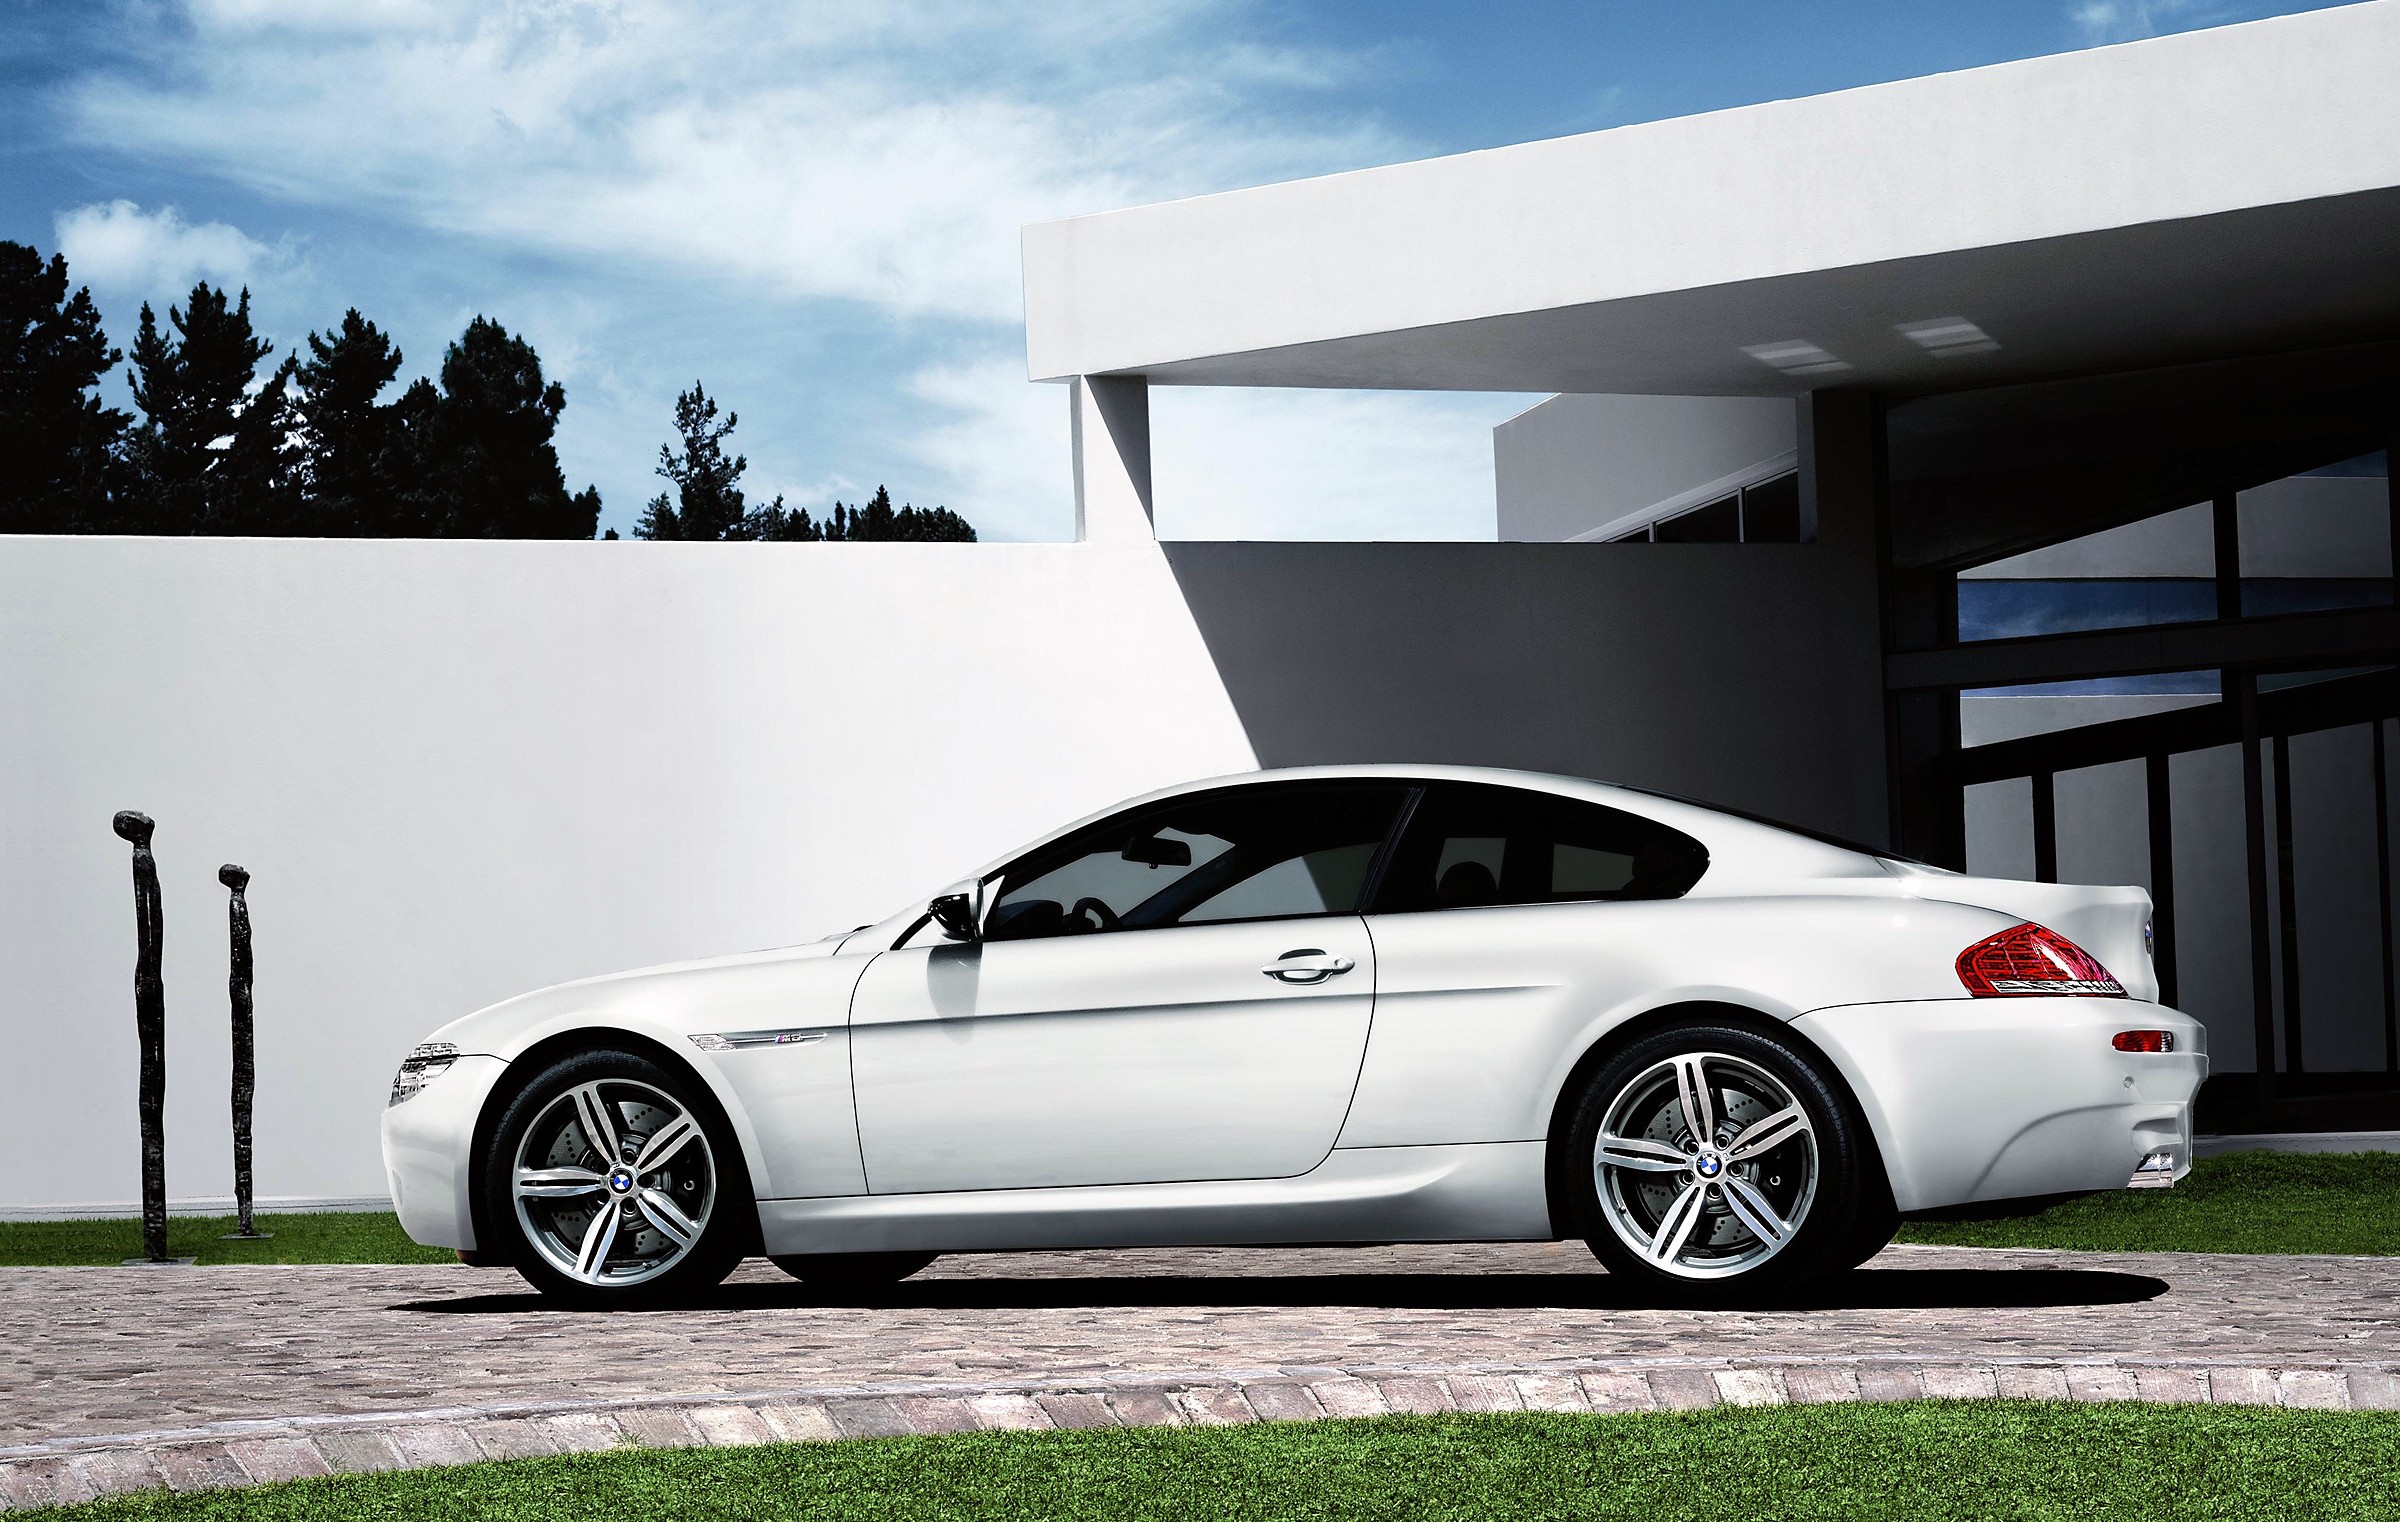 BMW 6 Series Edition Sport Coupe